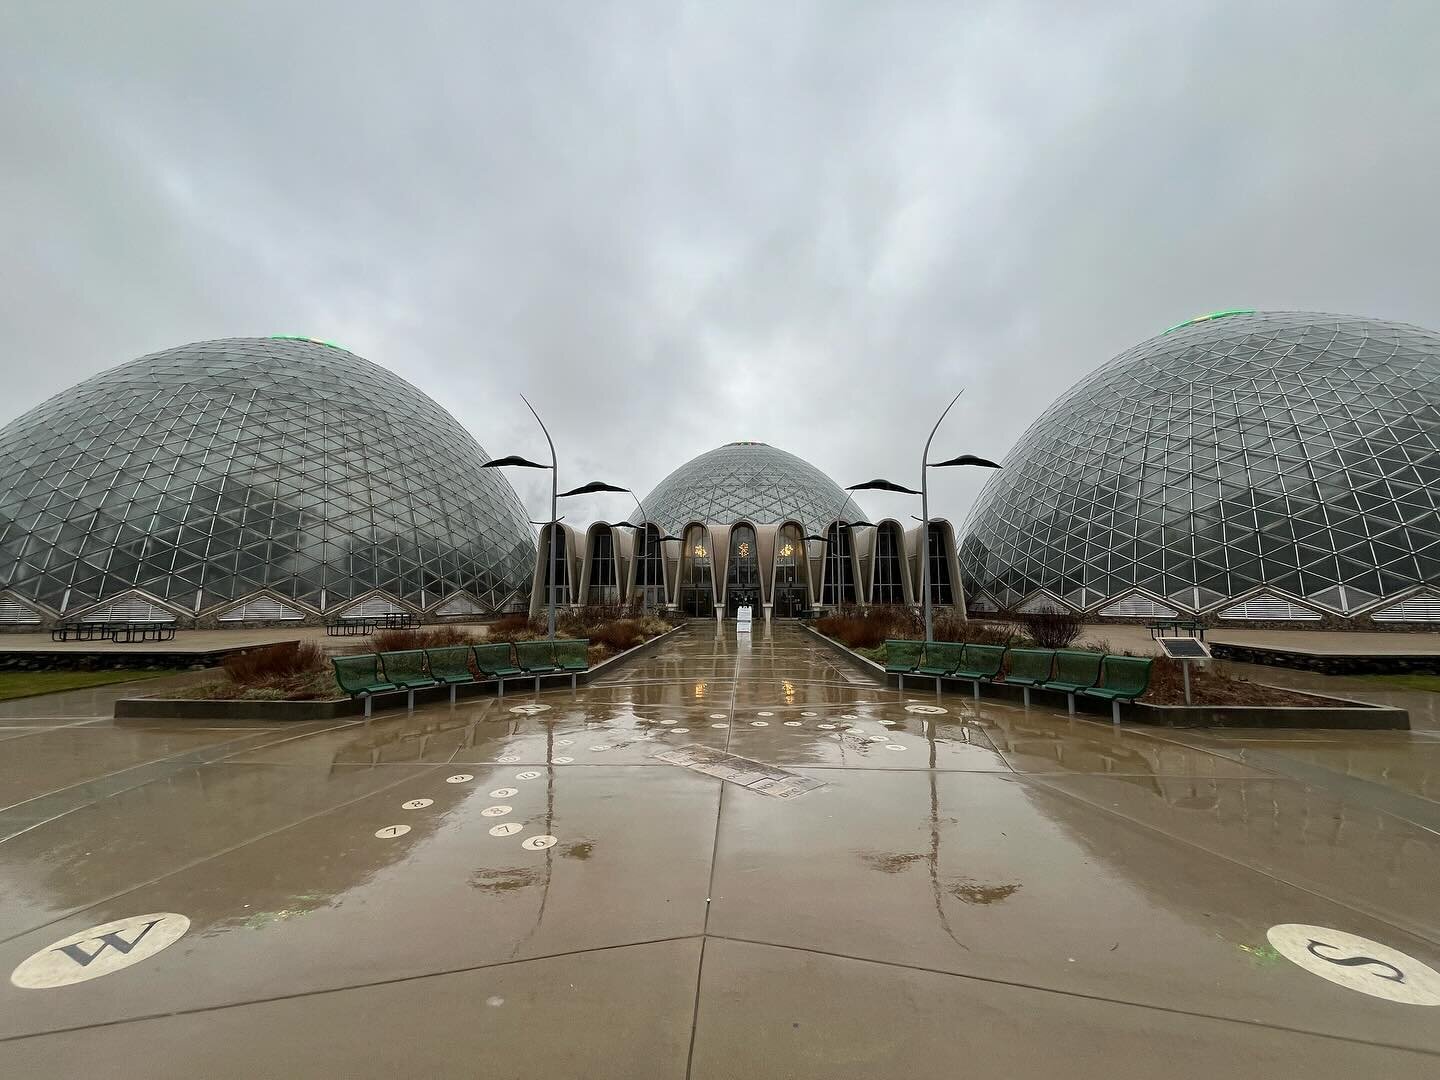 Visited the Mitchell Park Domes, a series of three giant domed horticultural conservatories containing plants from different environments: Tropical, Desert, and &ldquo;Show&rdquo; (featuring miniatures). Construction on the domes began in 1959, and t